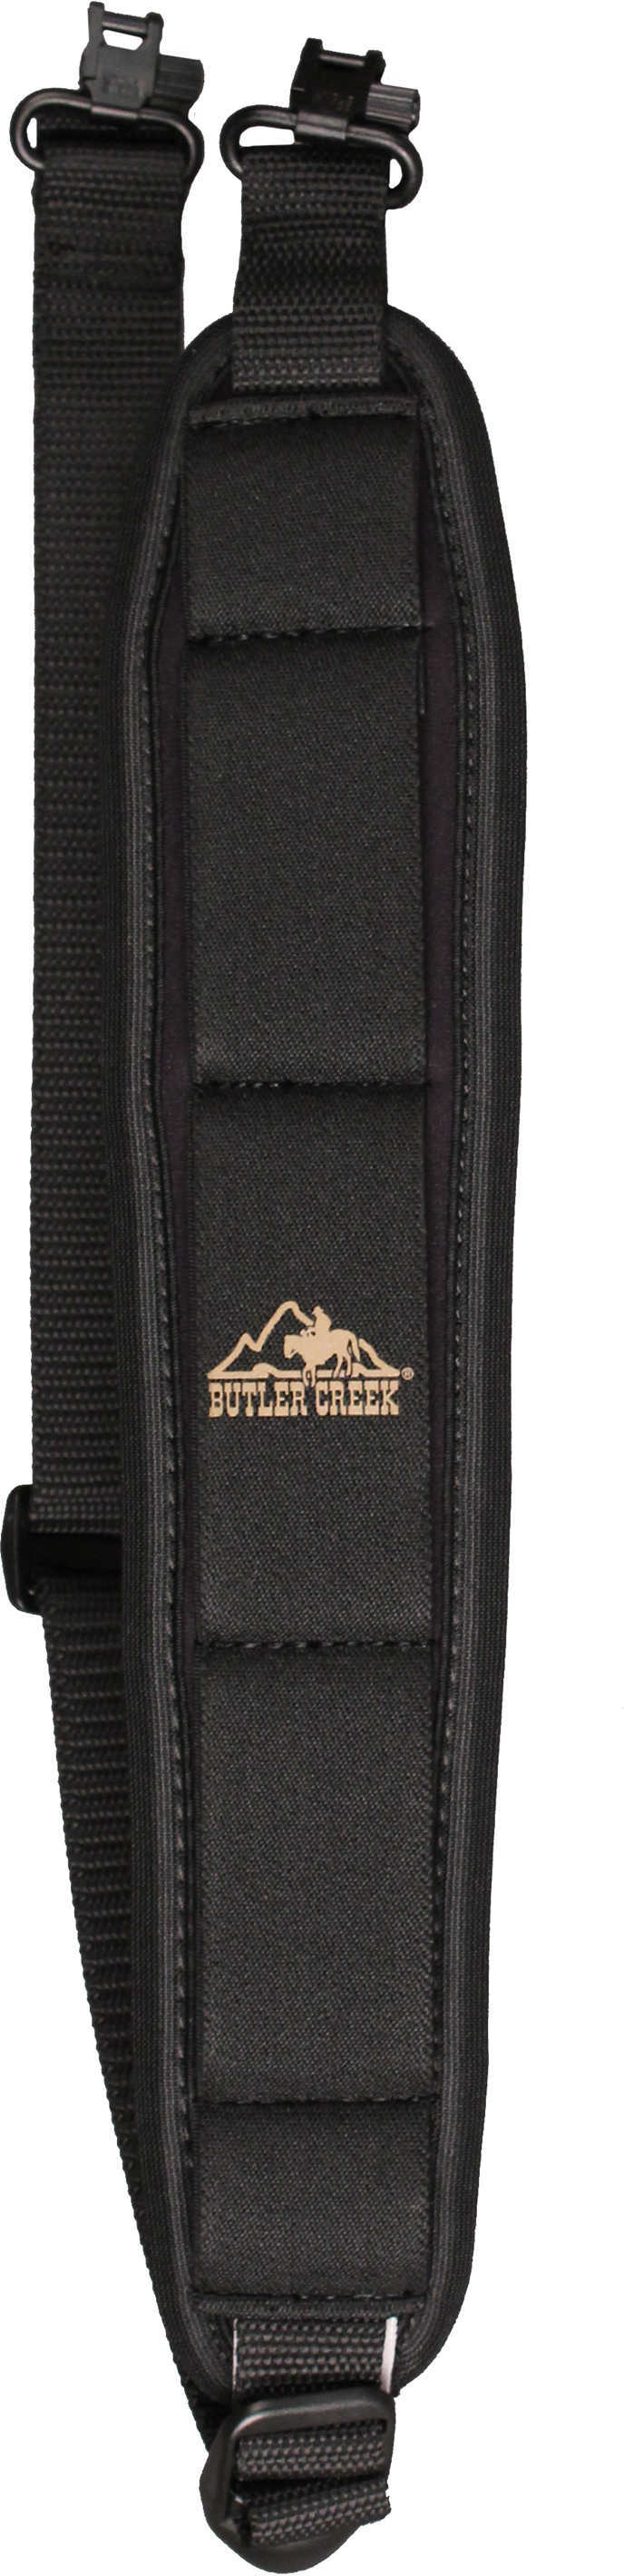 Butler Creek Black Rifle Sling With Swivels